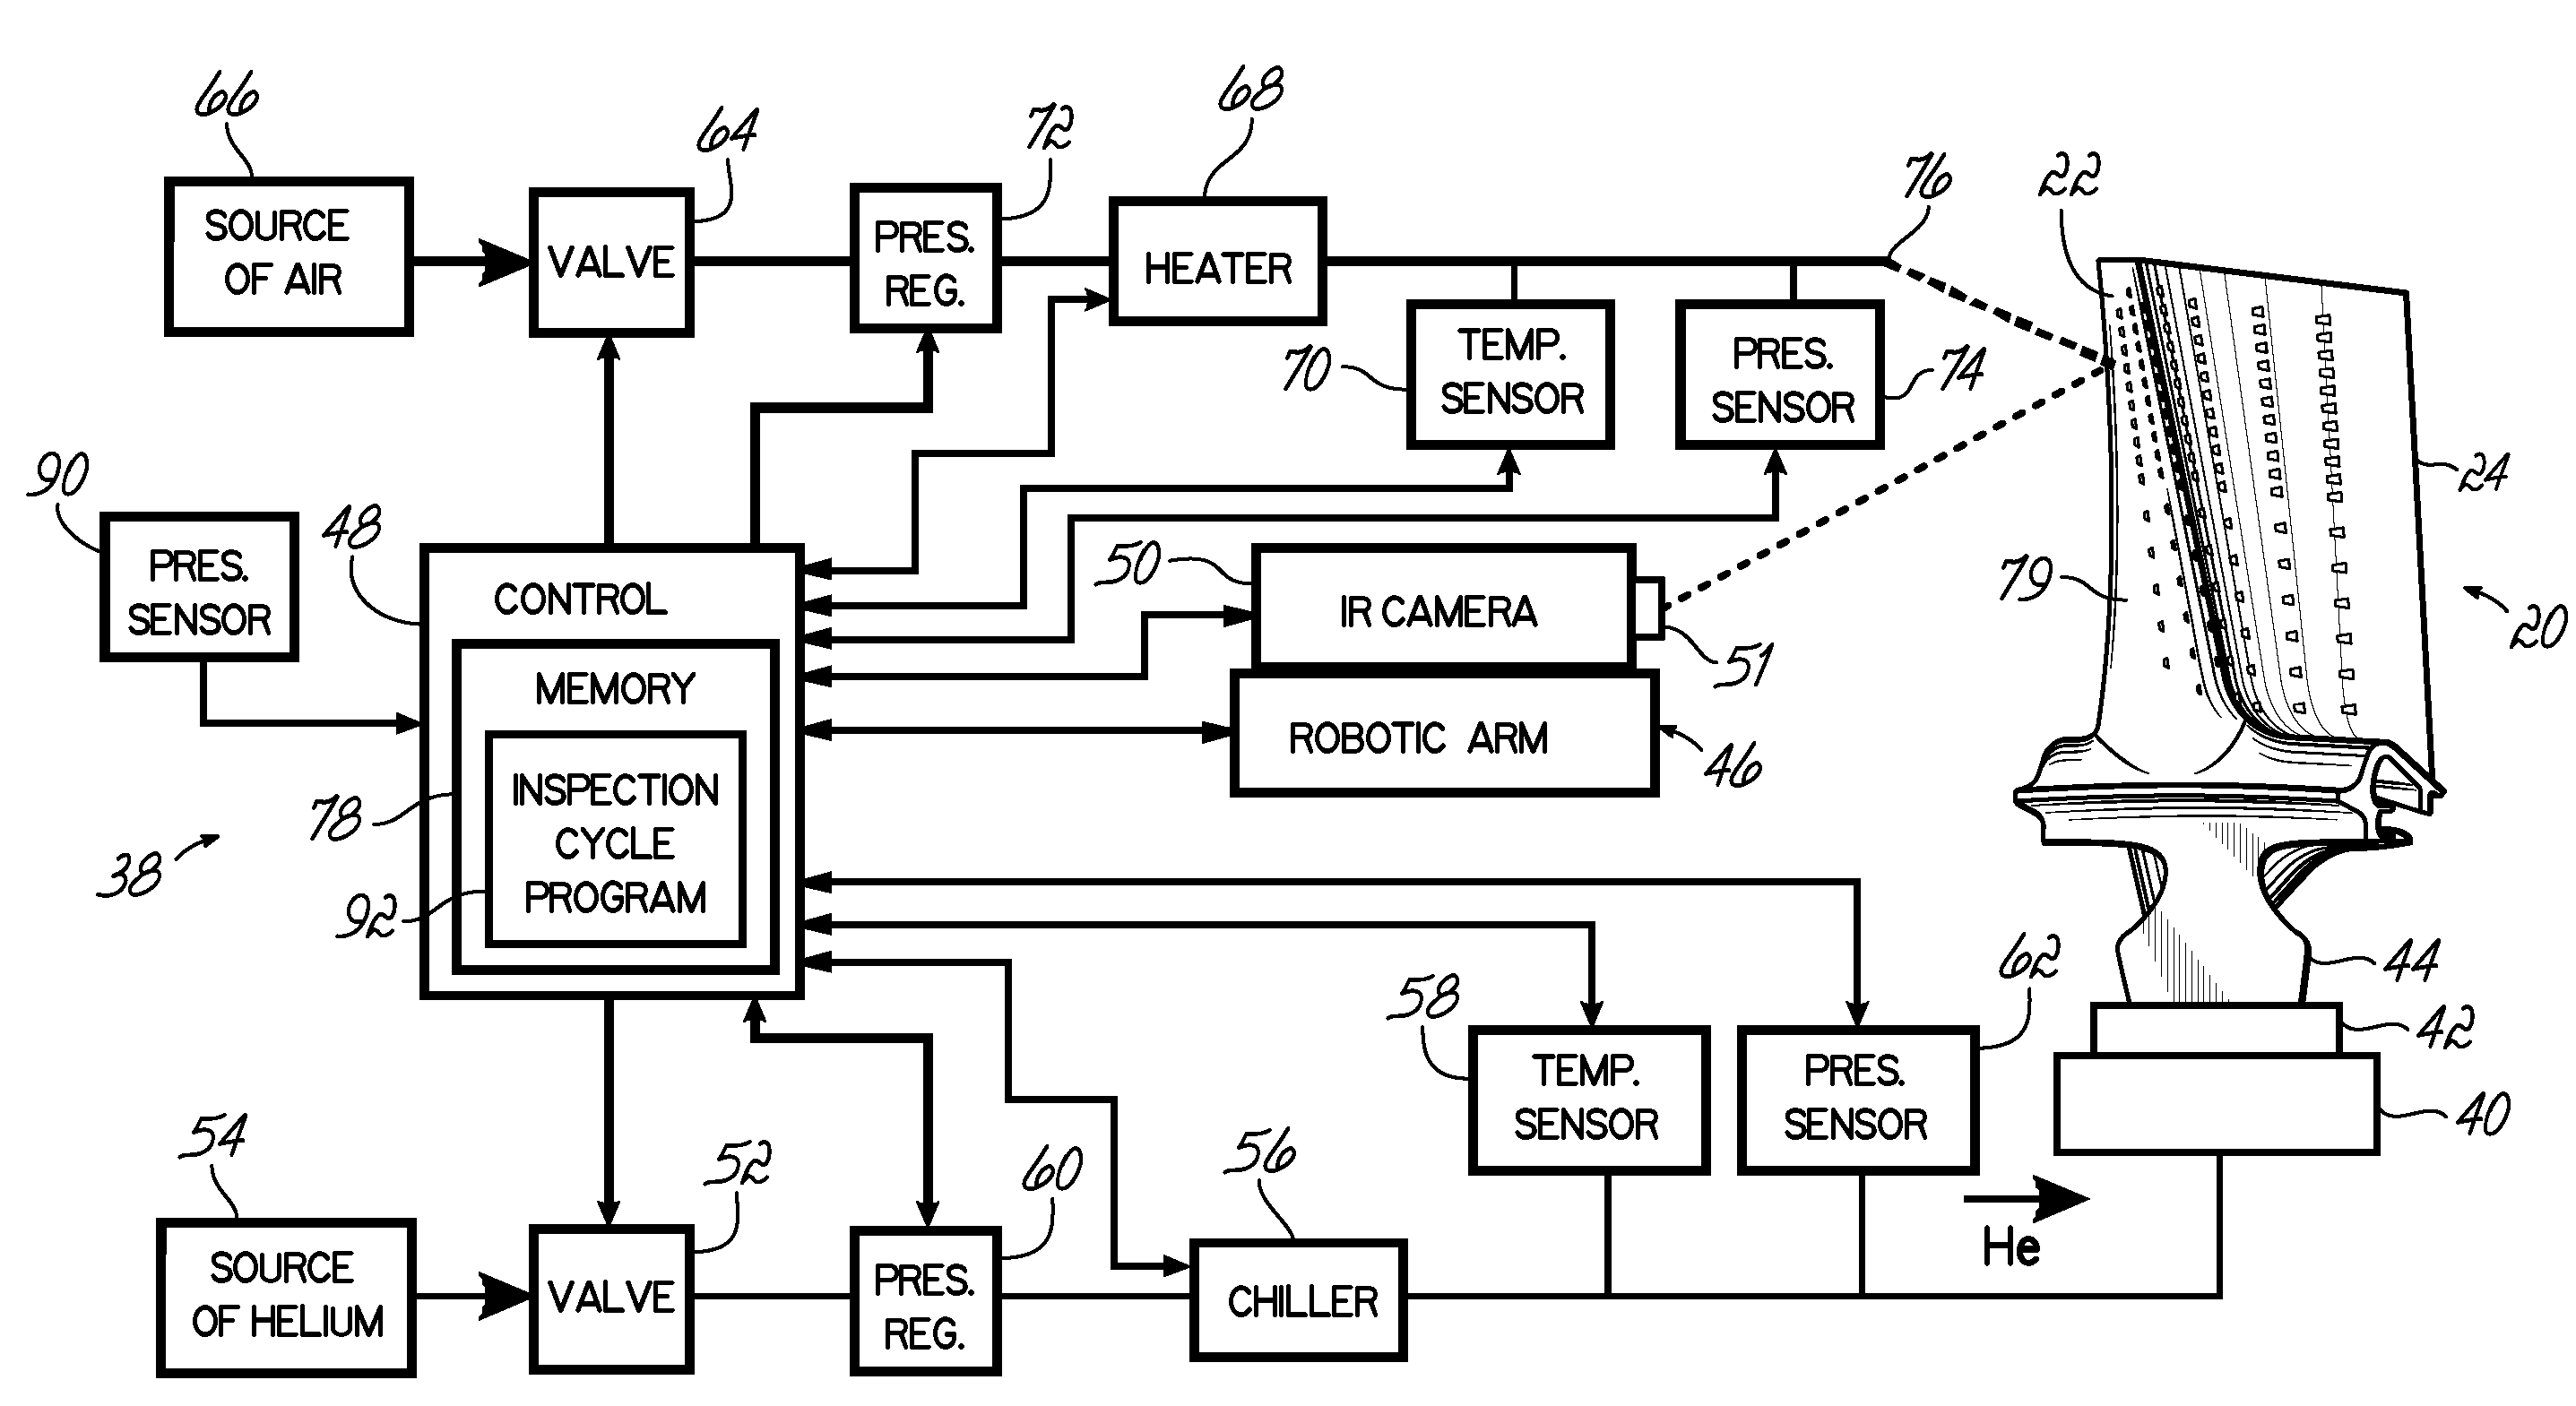 Apparatus and method for analyzing relative outward flow characterizations of fabricated features